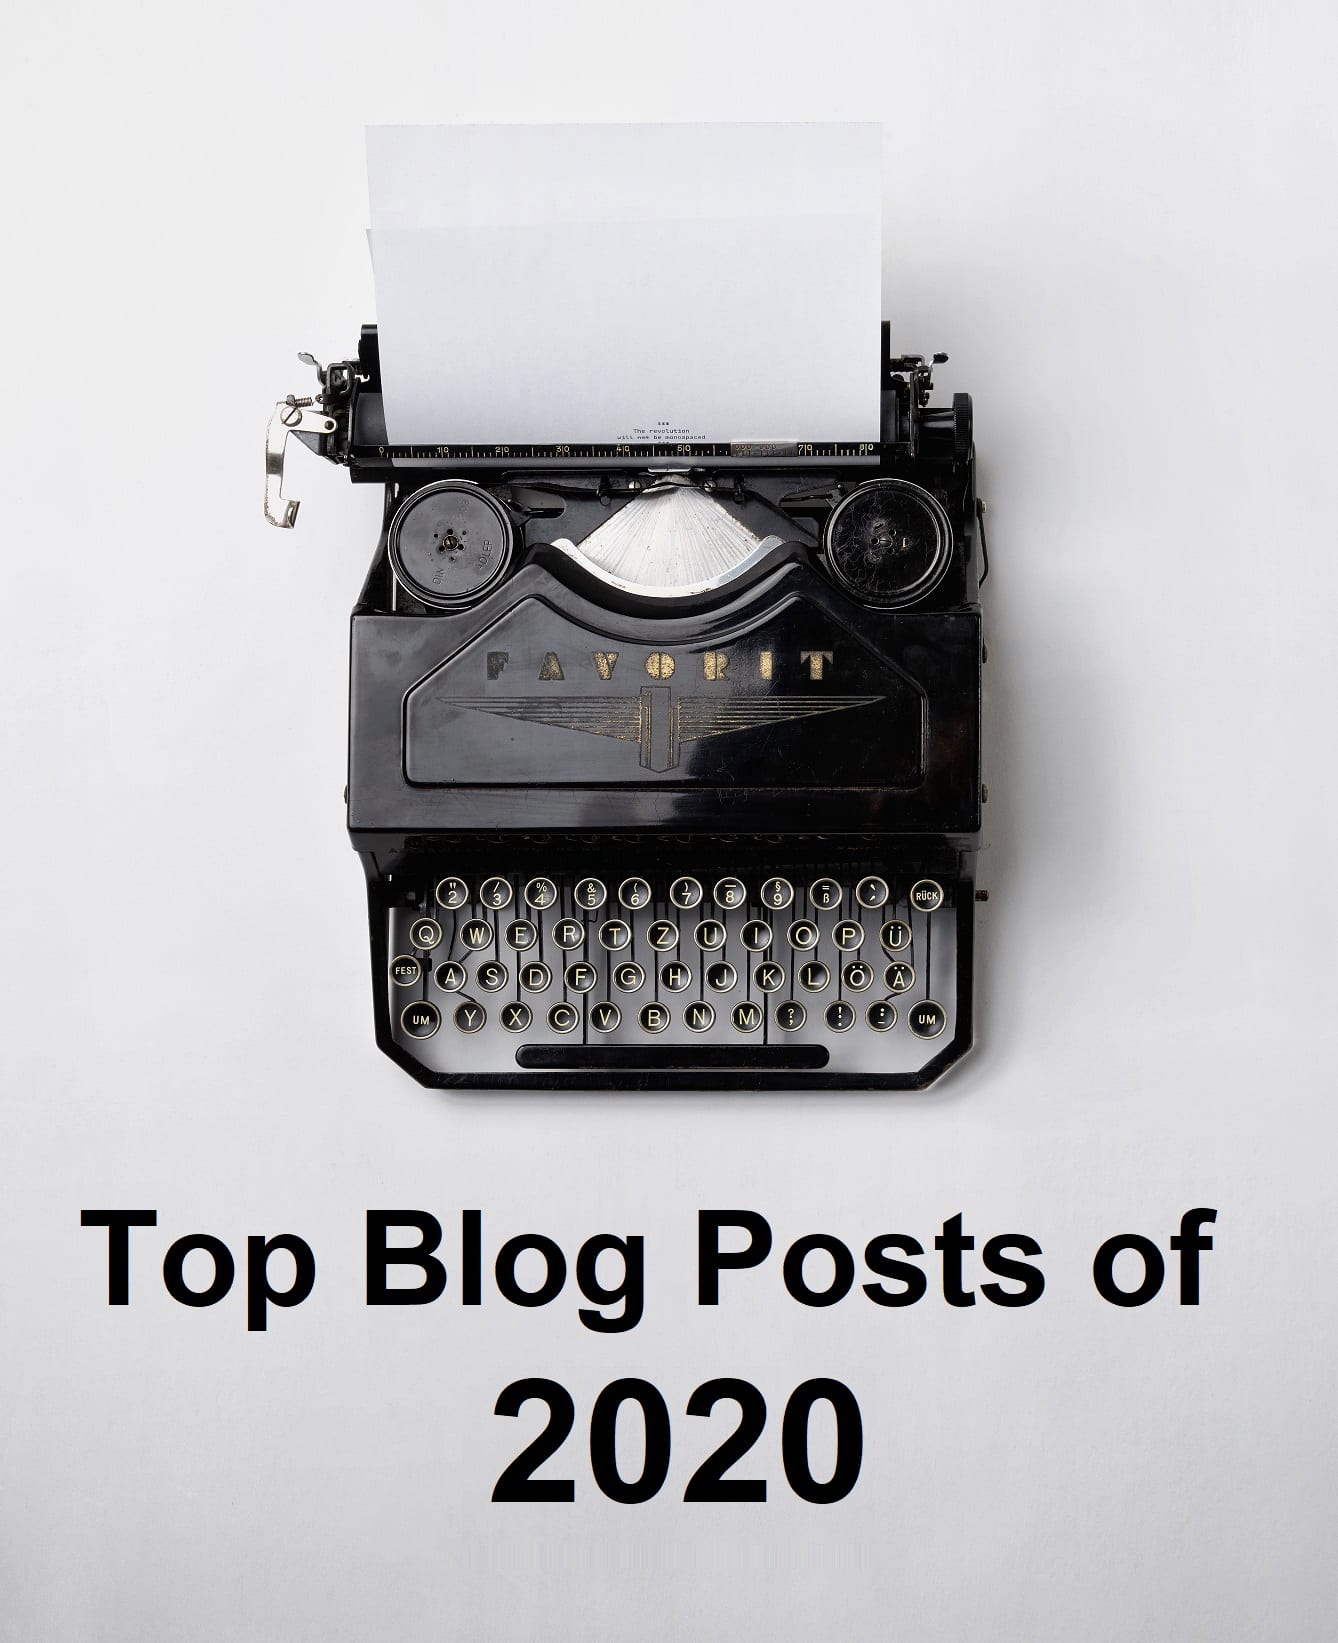 Image of a typewriter with the heading 'top blog posts of 2020'